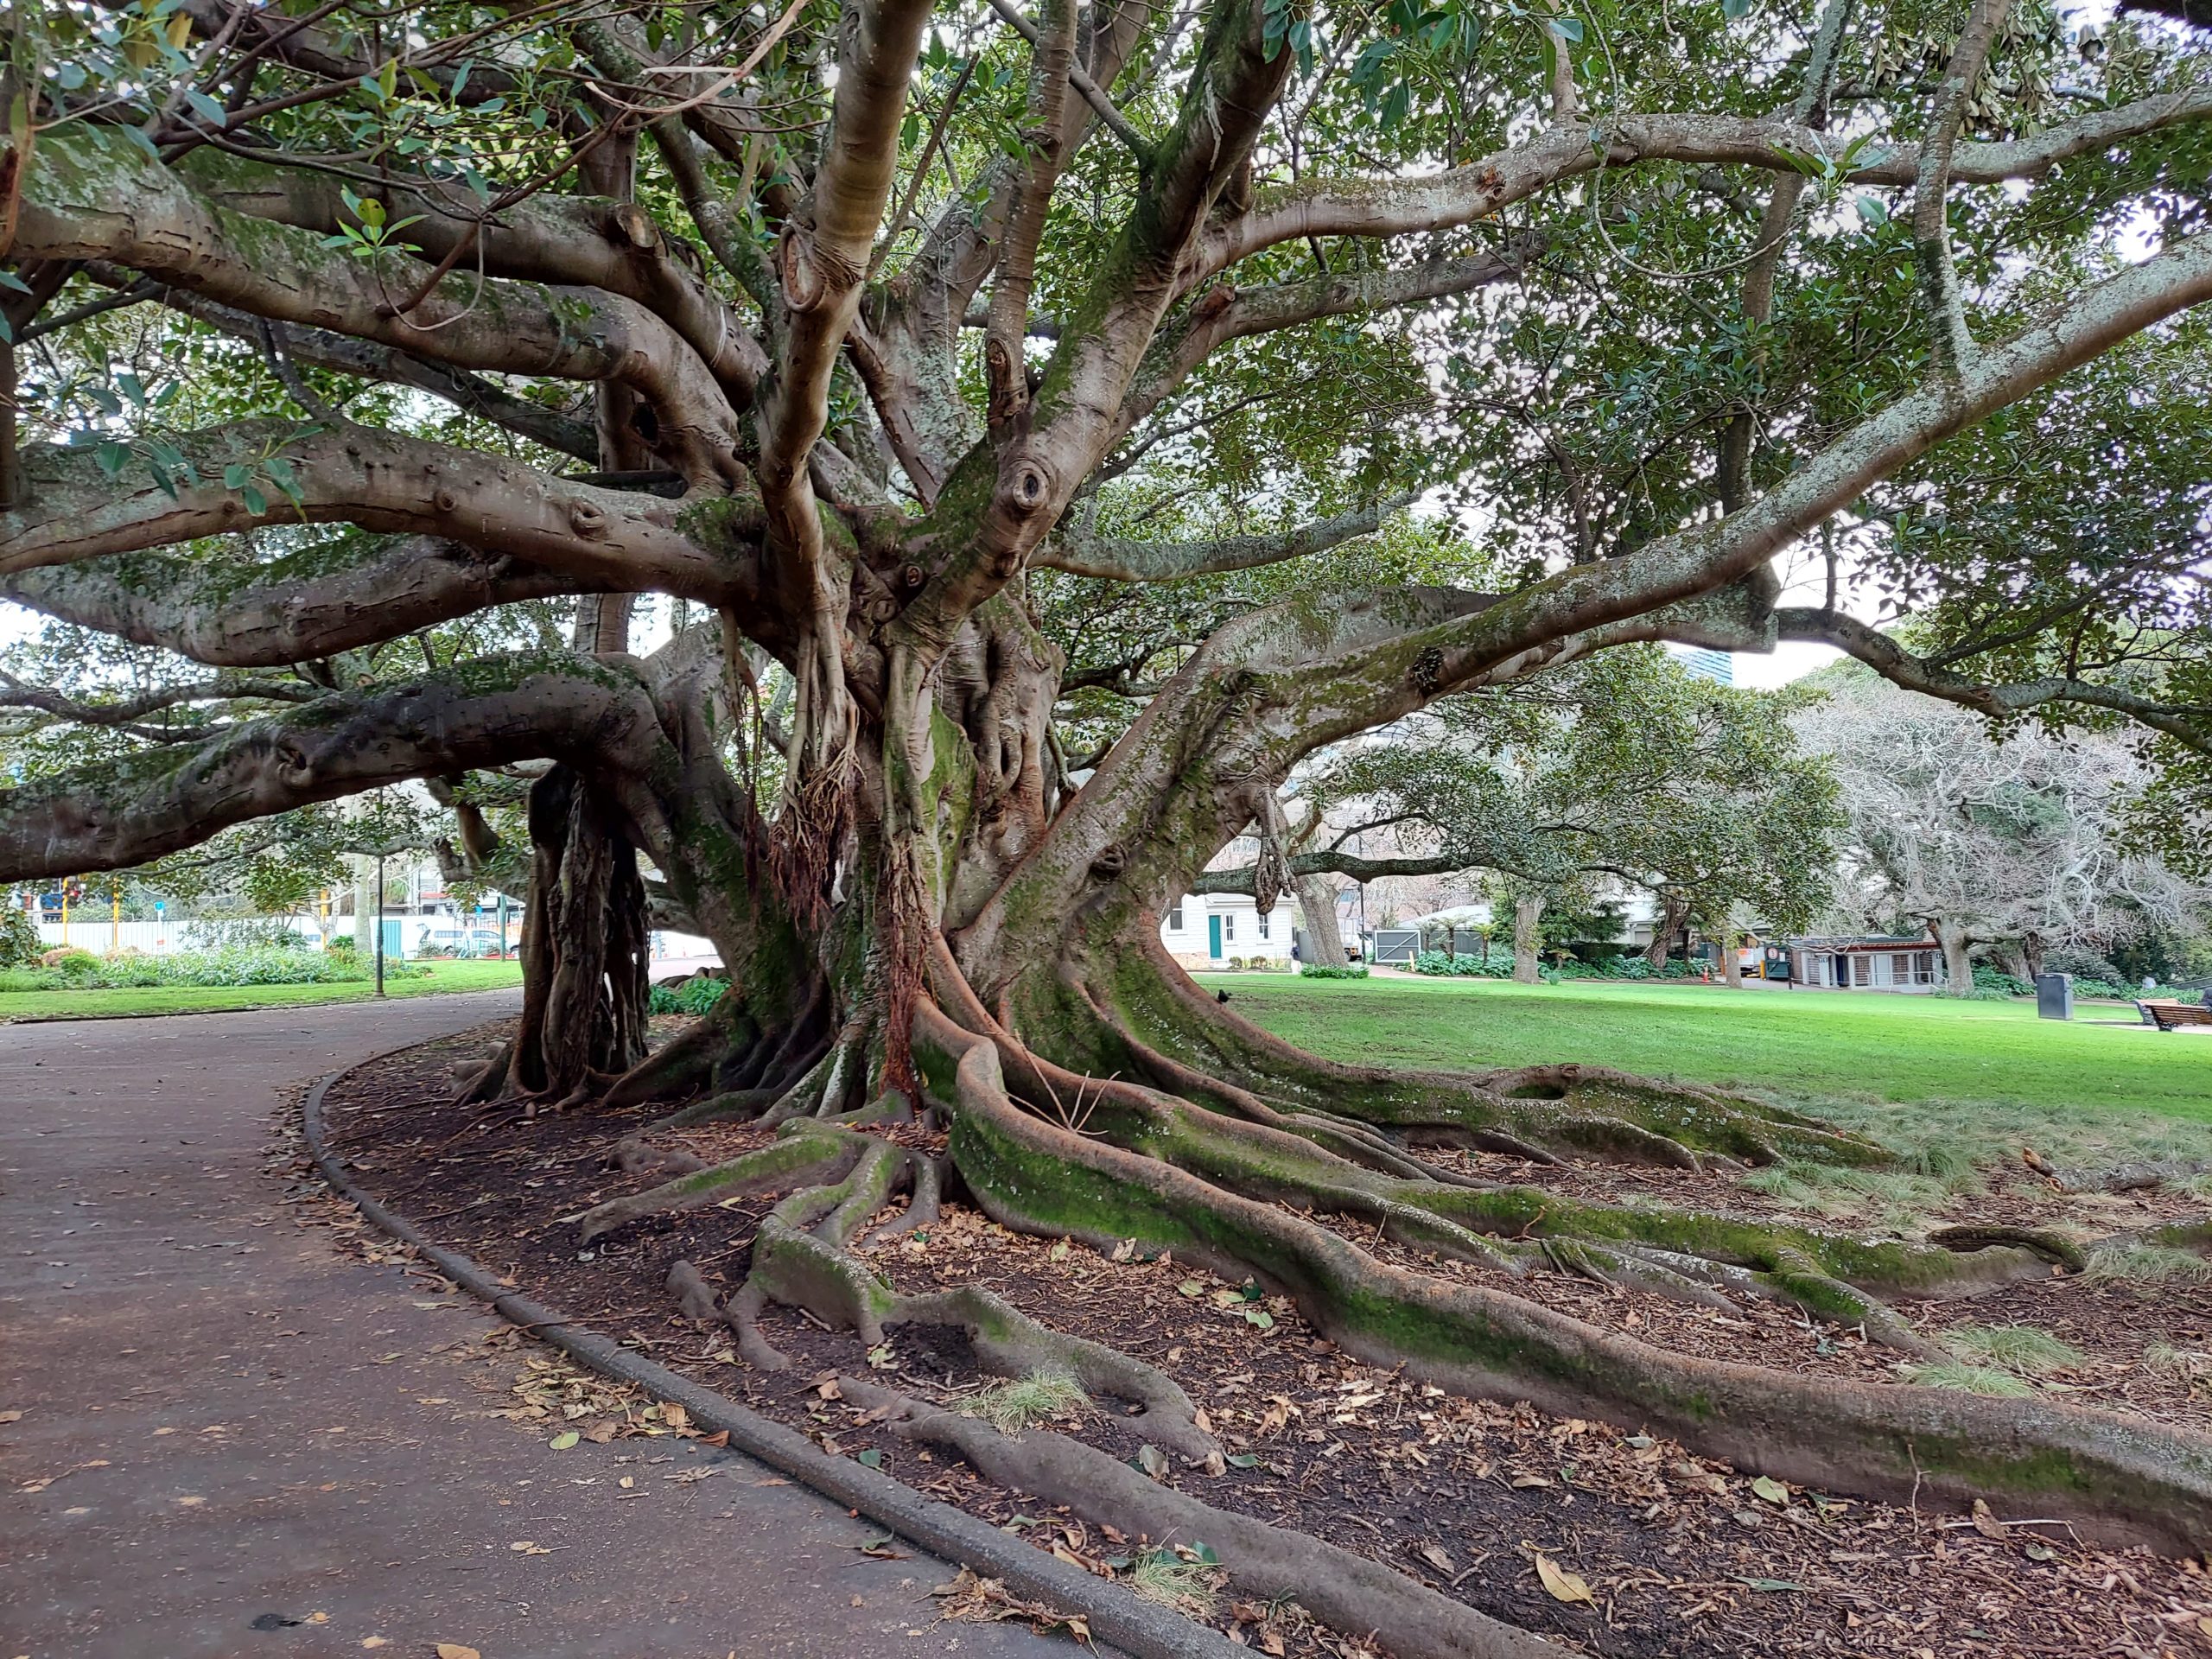 A very large tree in Auckland NZ